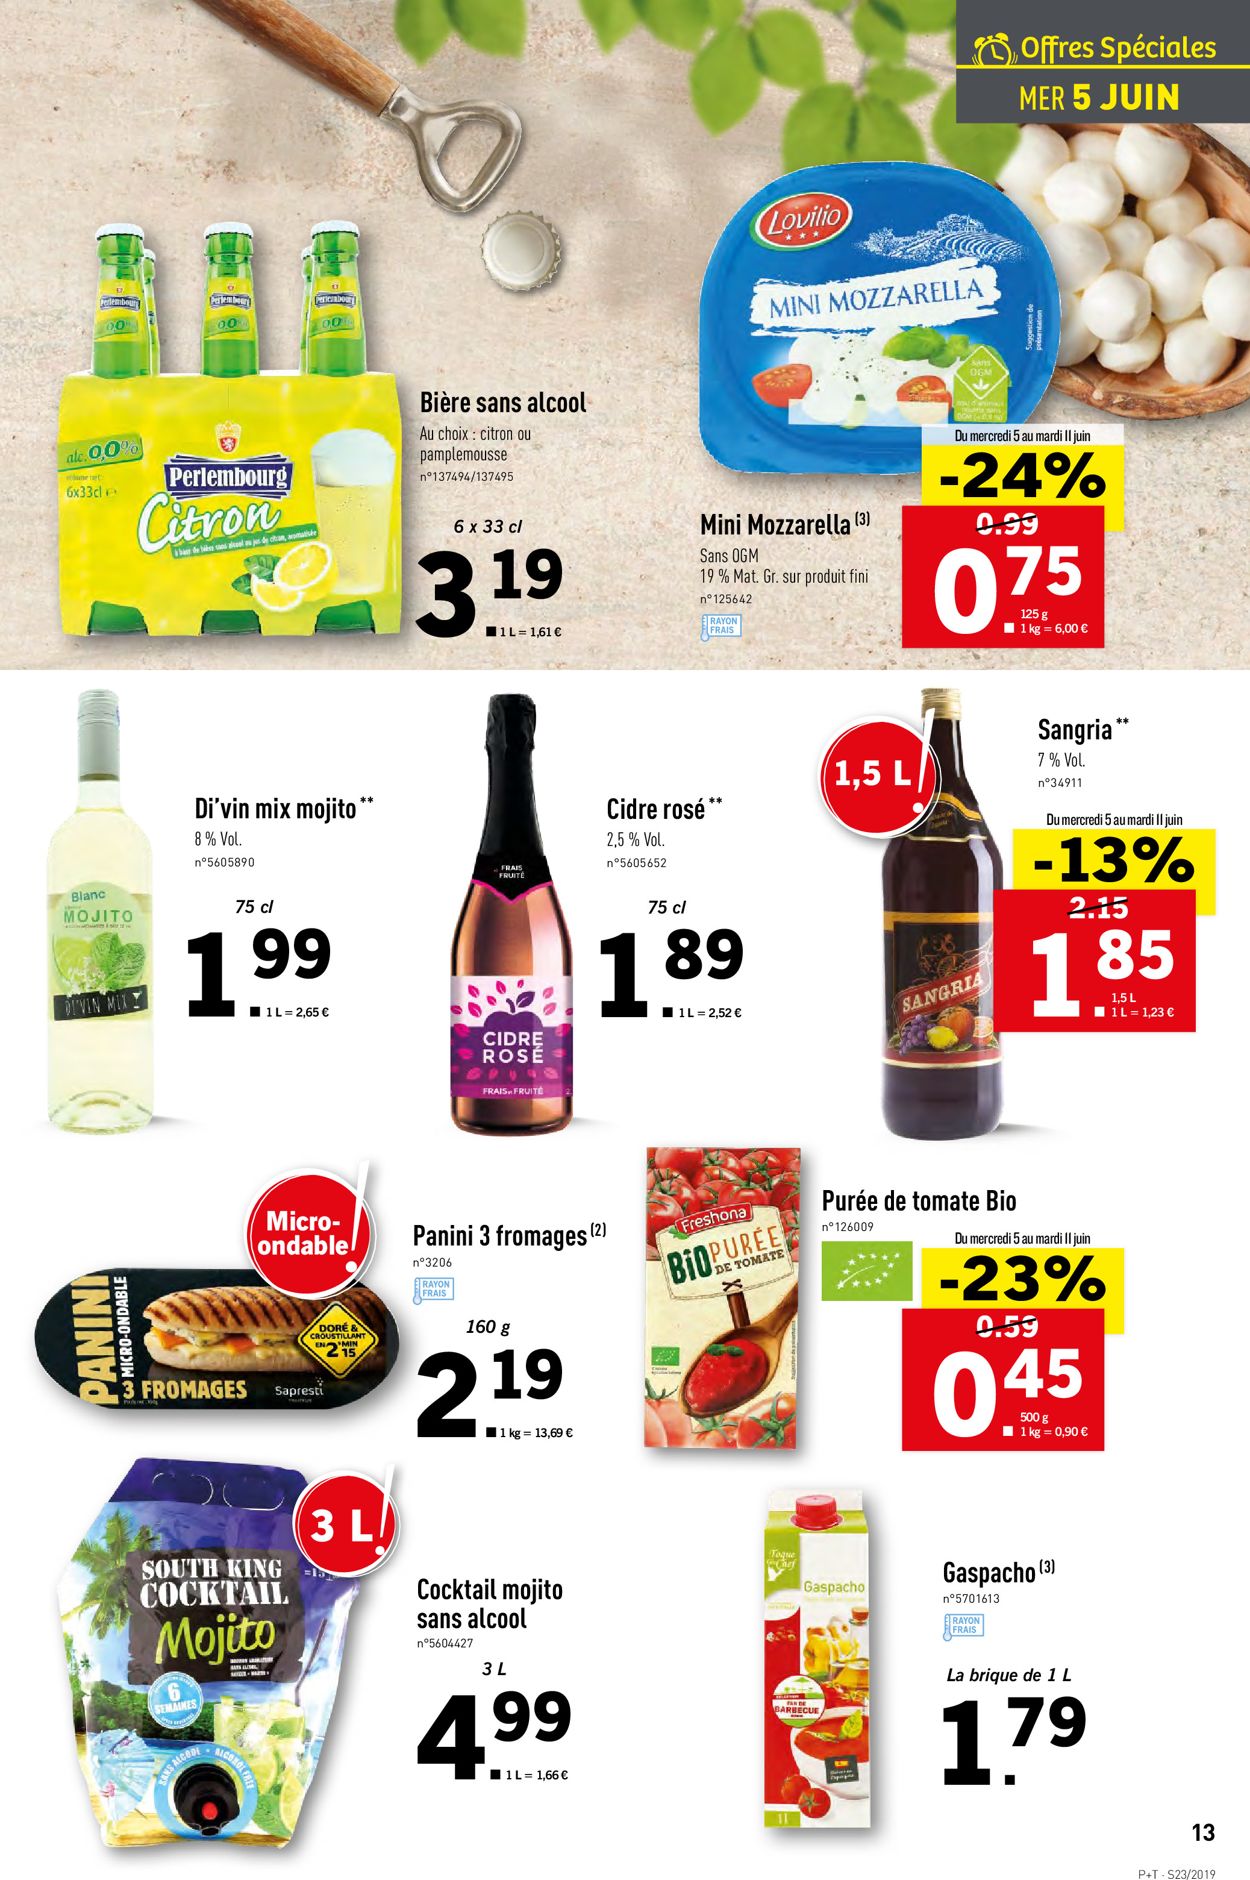 Lidl Catalogue - 05.06-11.06.2019 (Page 13)